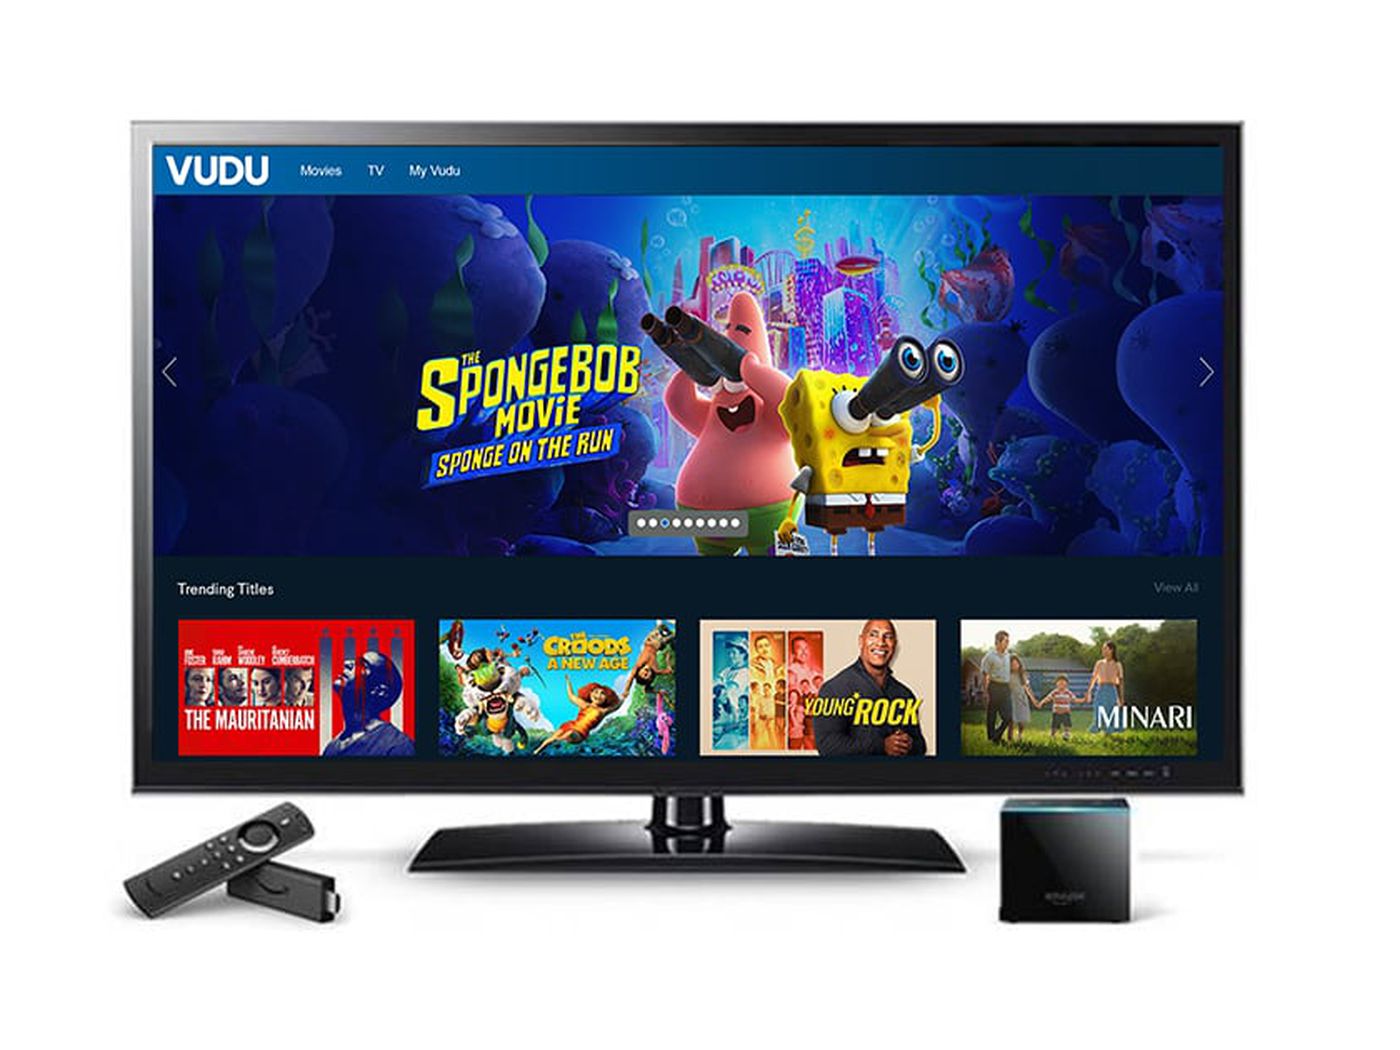 How To Sign Out Of Vudu On Smart TV